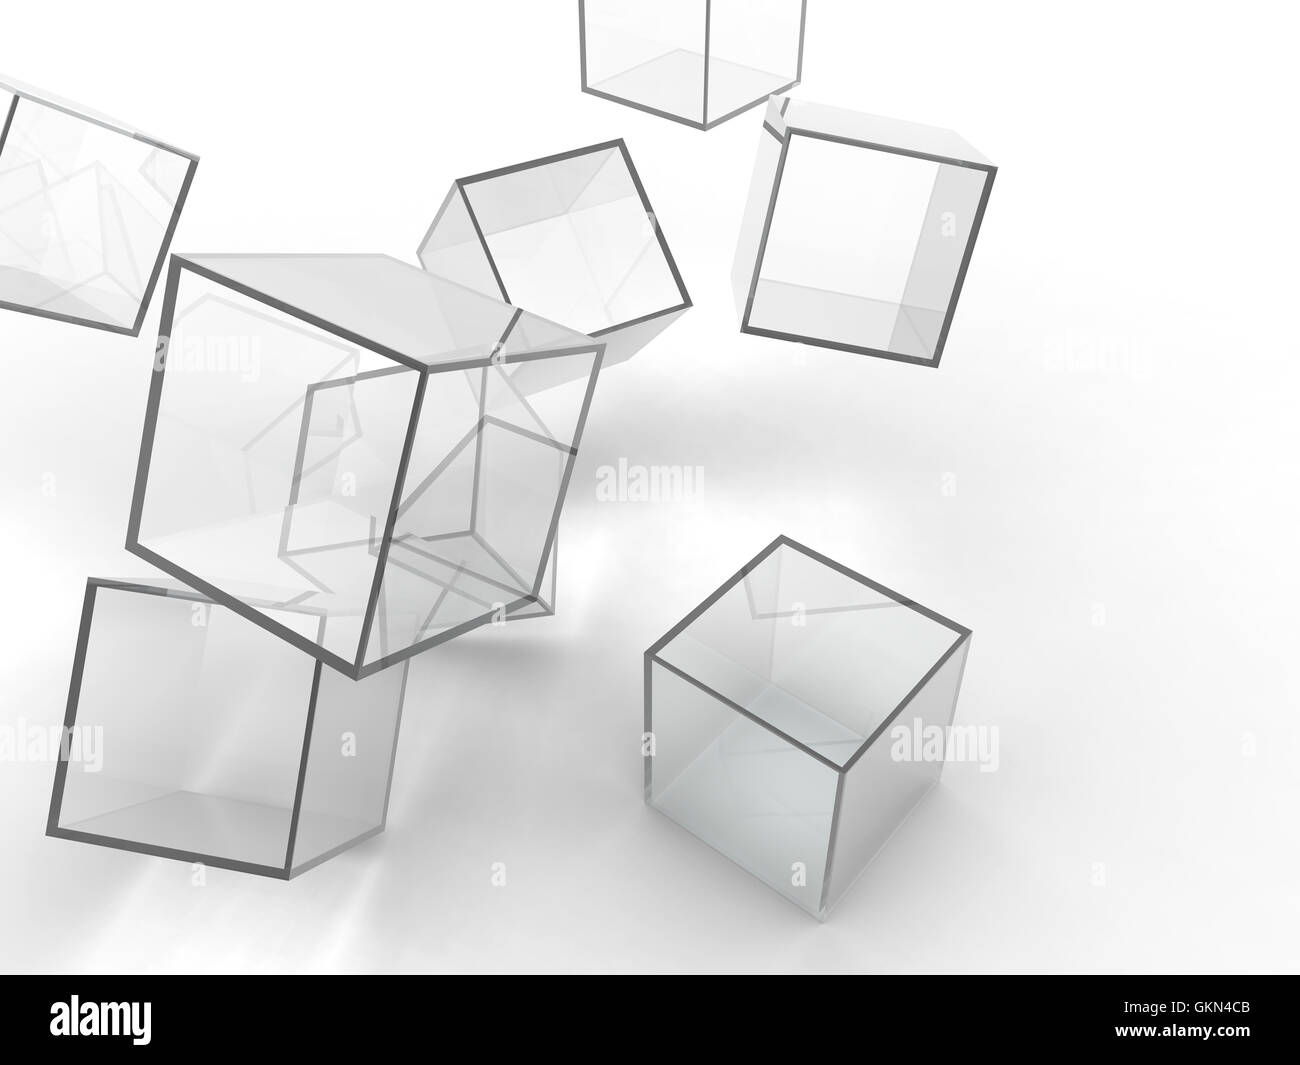 Abstract transparent glass cubes on a white background Stock Photo